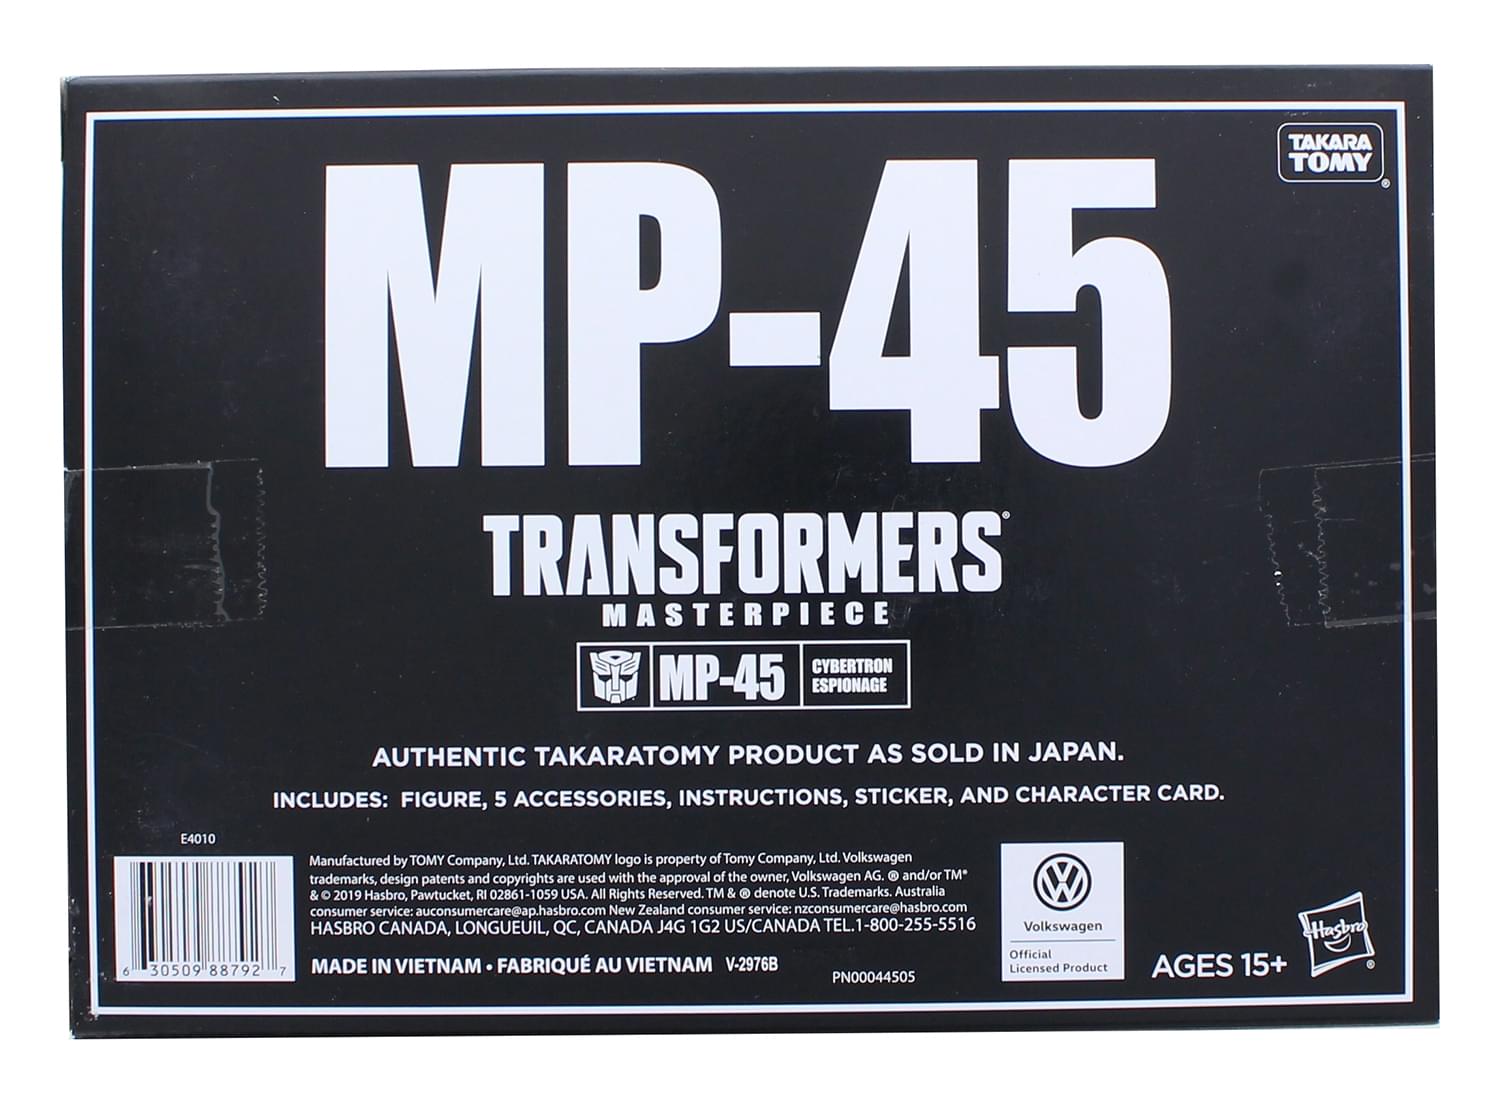 Transformers Masterpiece Edition MP-45 Bumblebee and Spike 2.0